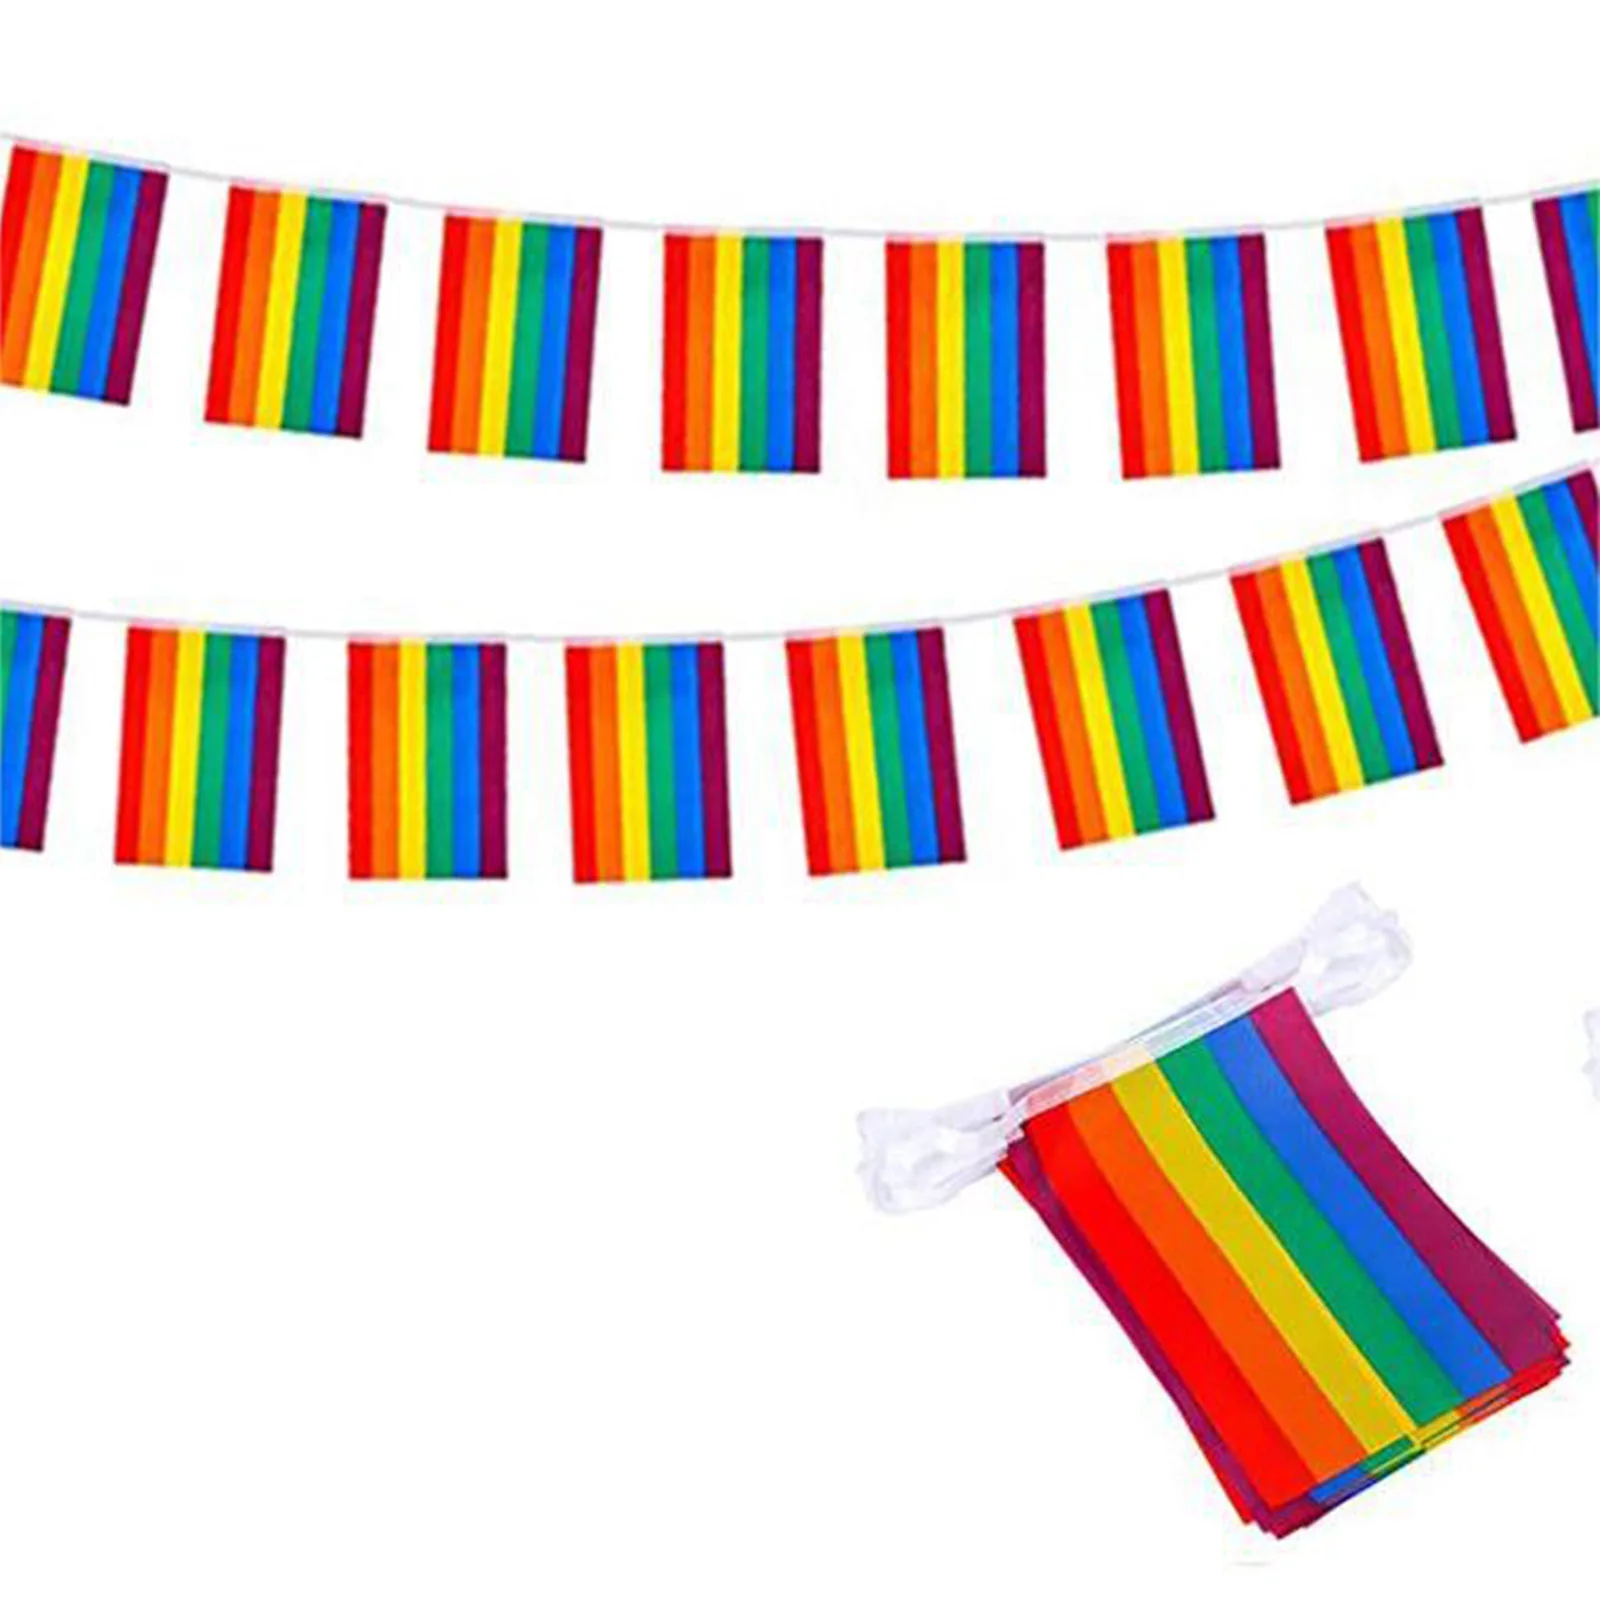 

Rainbow Flag Banners 2pcs Decoration Festival Party Celebration For LGBT Indoor/Outdoor Pride Banner String Flag